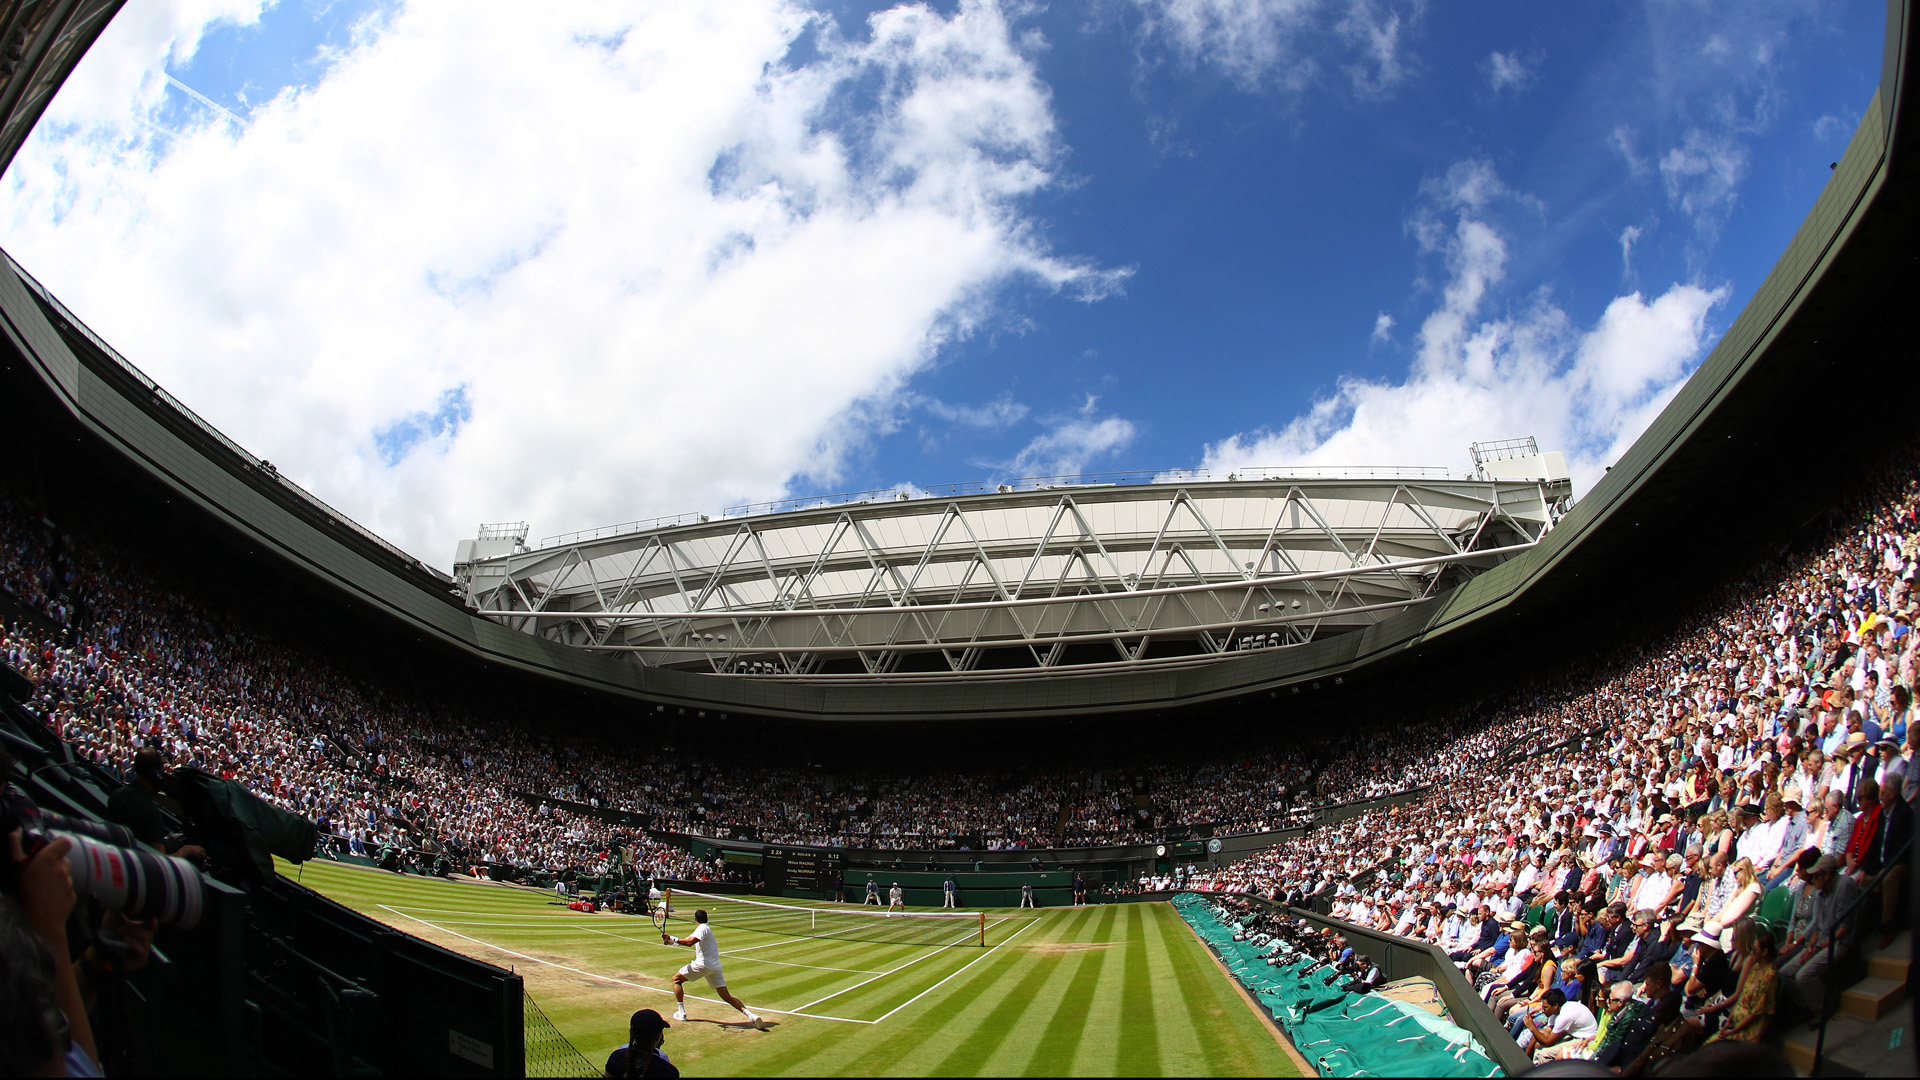 Wimbledon 2021: Schedule, Seedings, Draw, When And Where to Watch